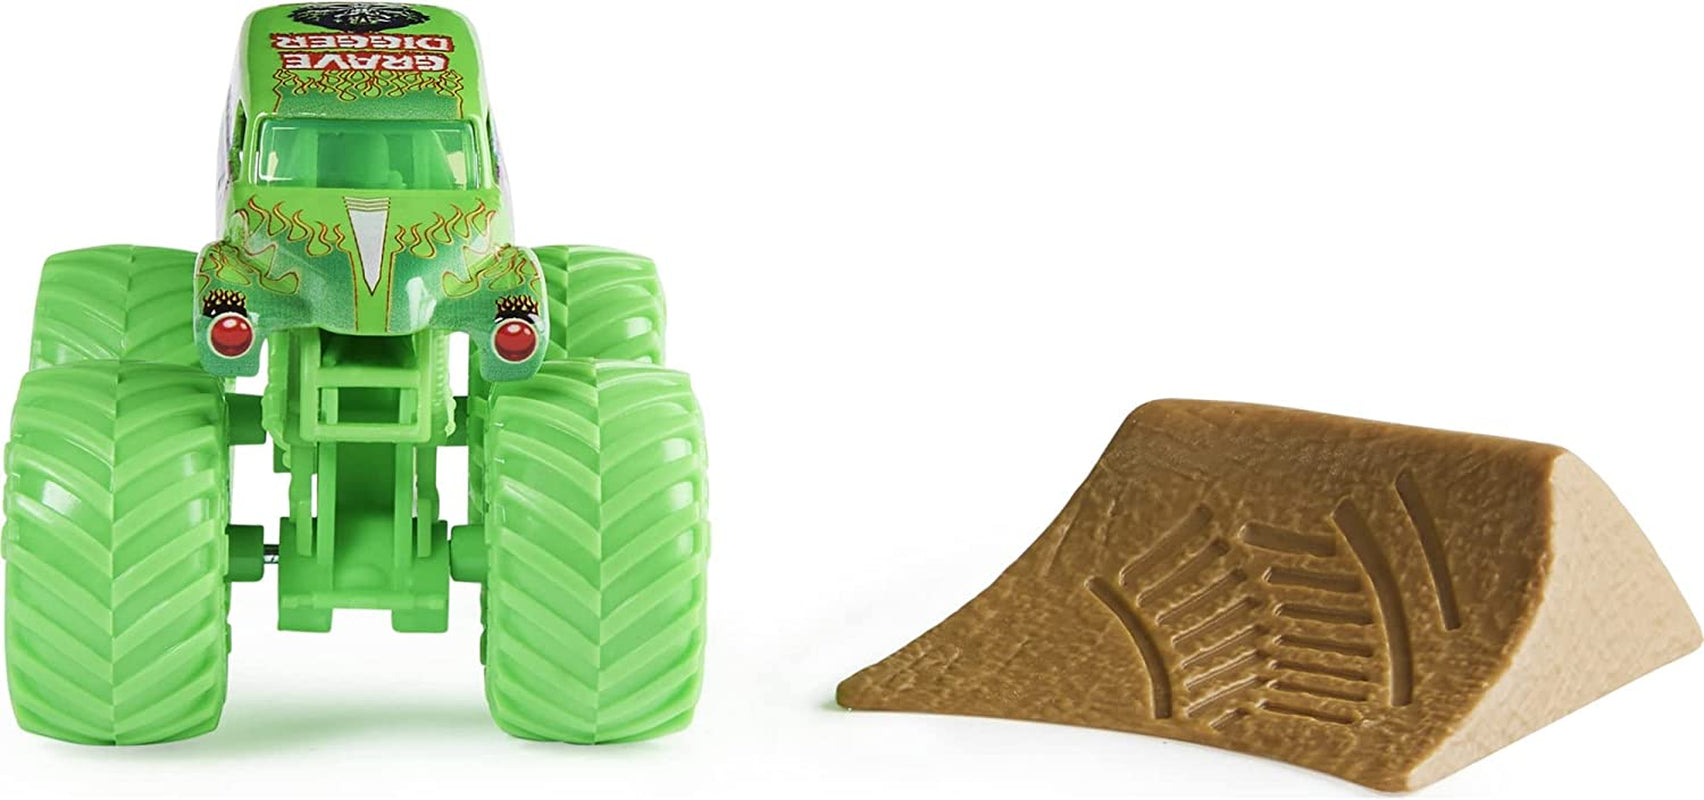 Monster Jam 2022 Spin Master 1:64 Diecast Truck with Bonus Accessory: Hyper Fueled Grave Digger